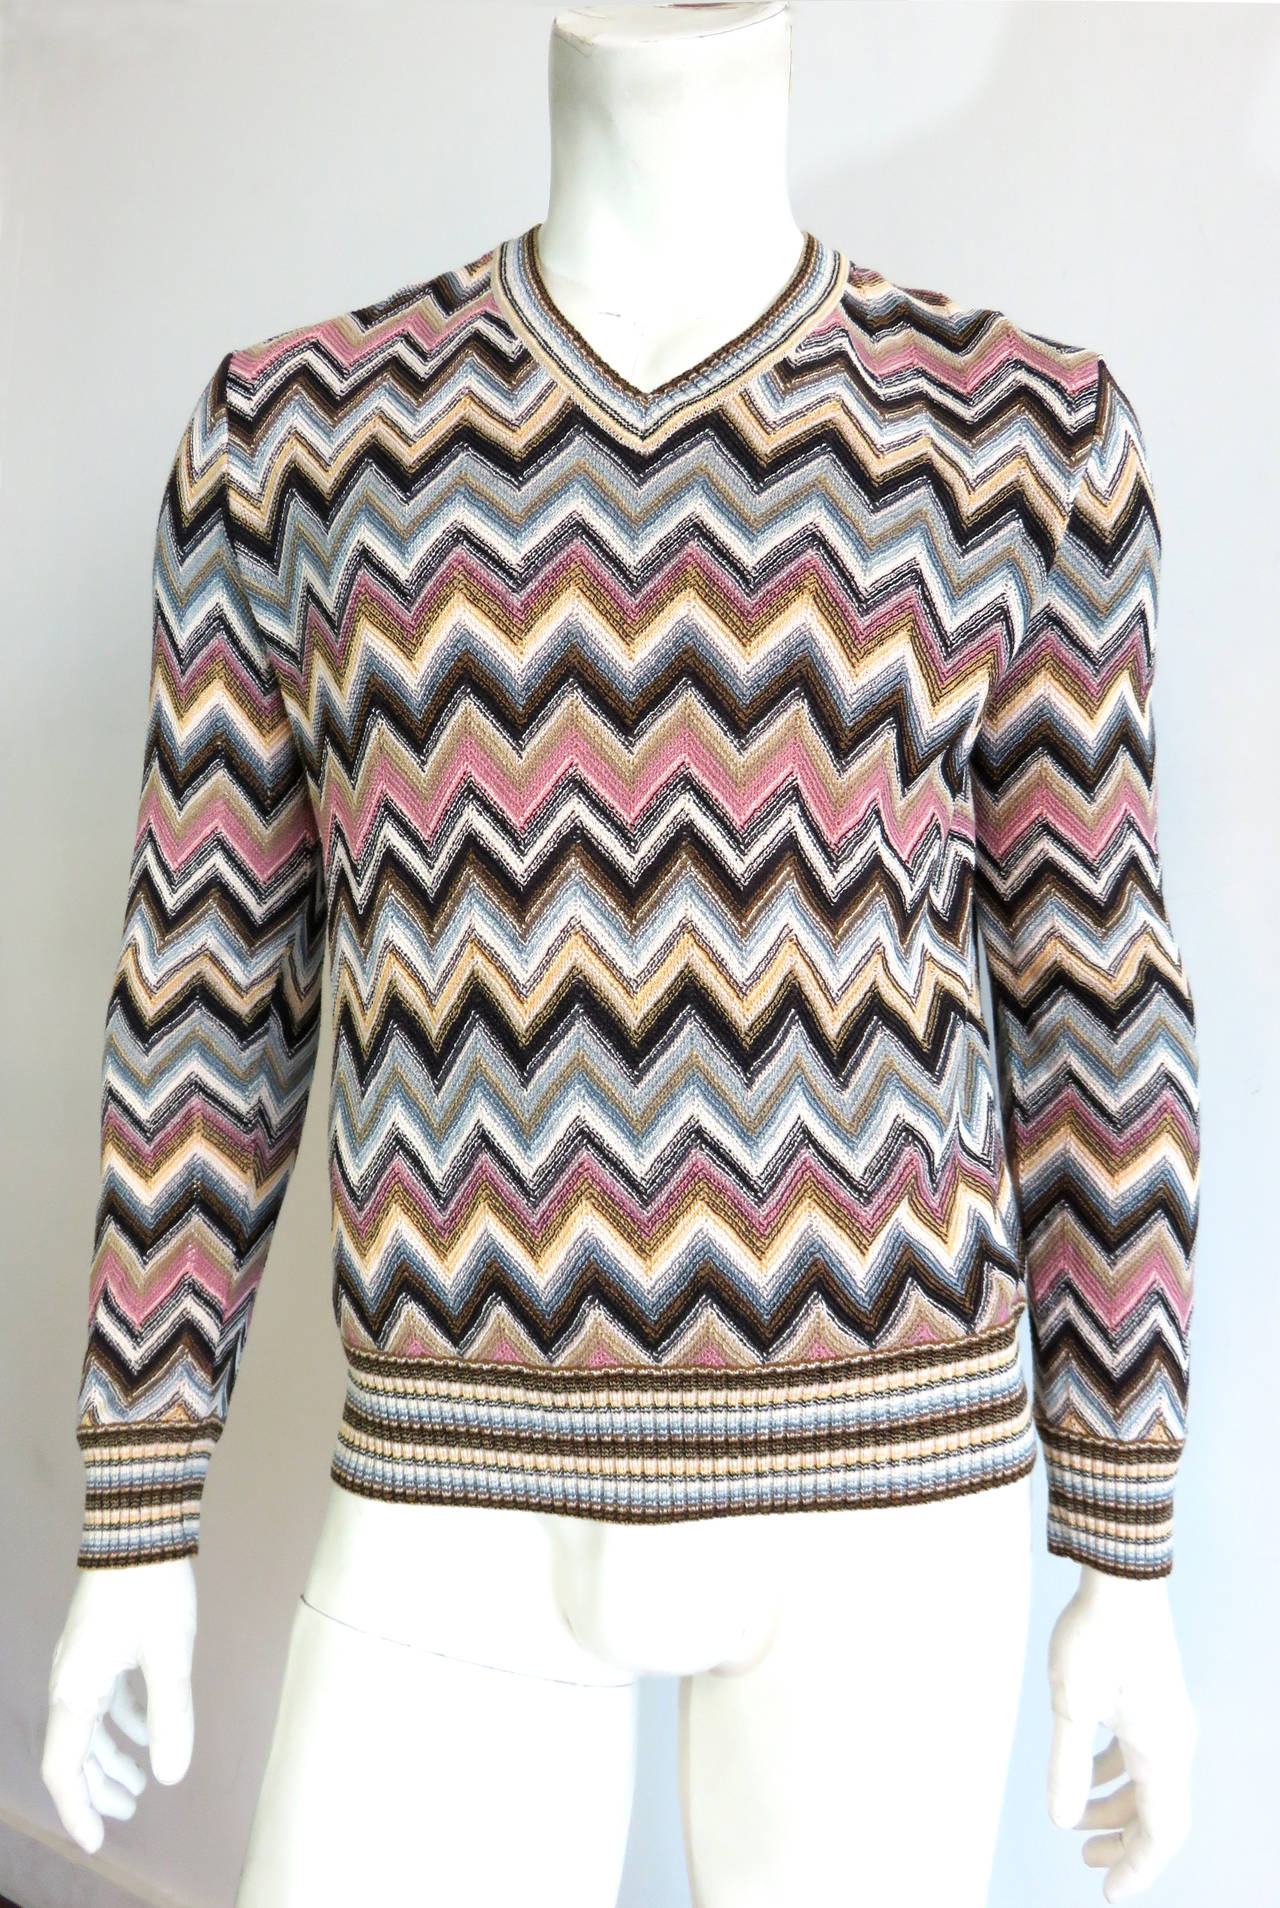 Excellent condition, MISSONI Men's linen-blend, chevron striped beach sweater.

'V'-neck silhouette with multi-color striped rib-knit trim.

Made in Italy, as labeled.

*MEASUREMENTS*

IT label size 52 = US 42 (US Large)

The mannequin in